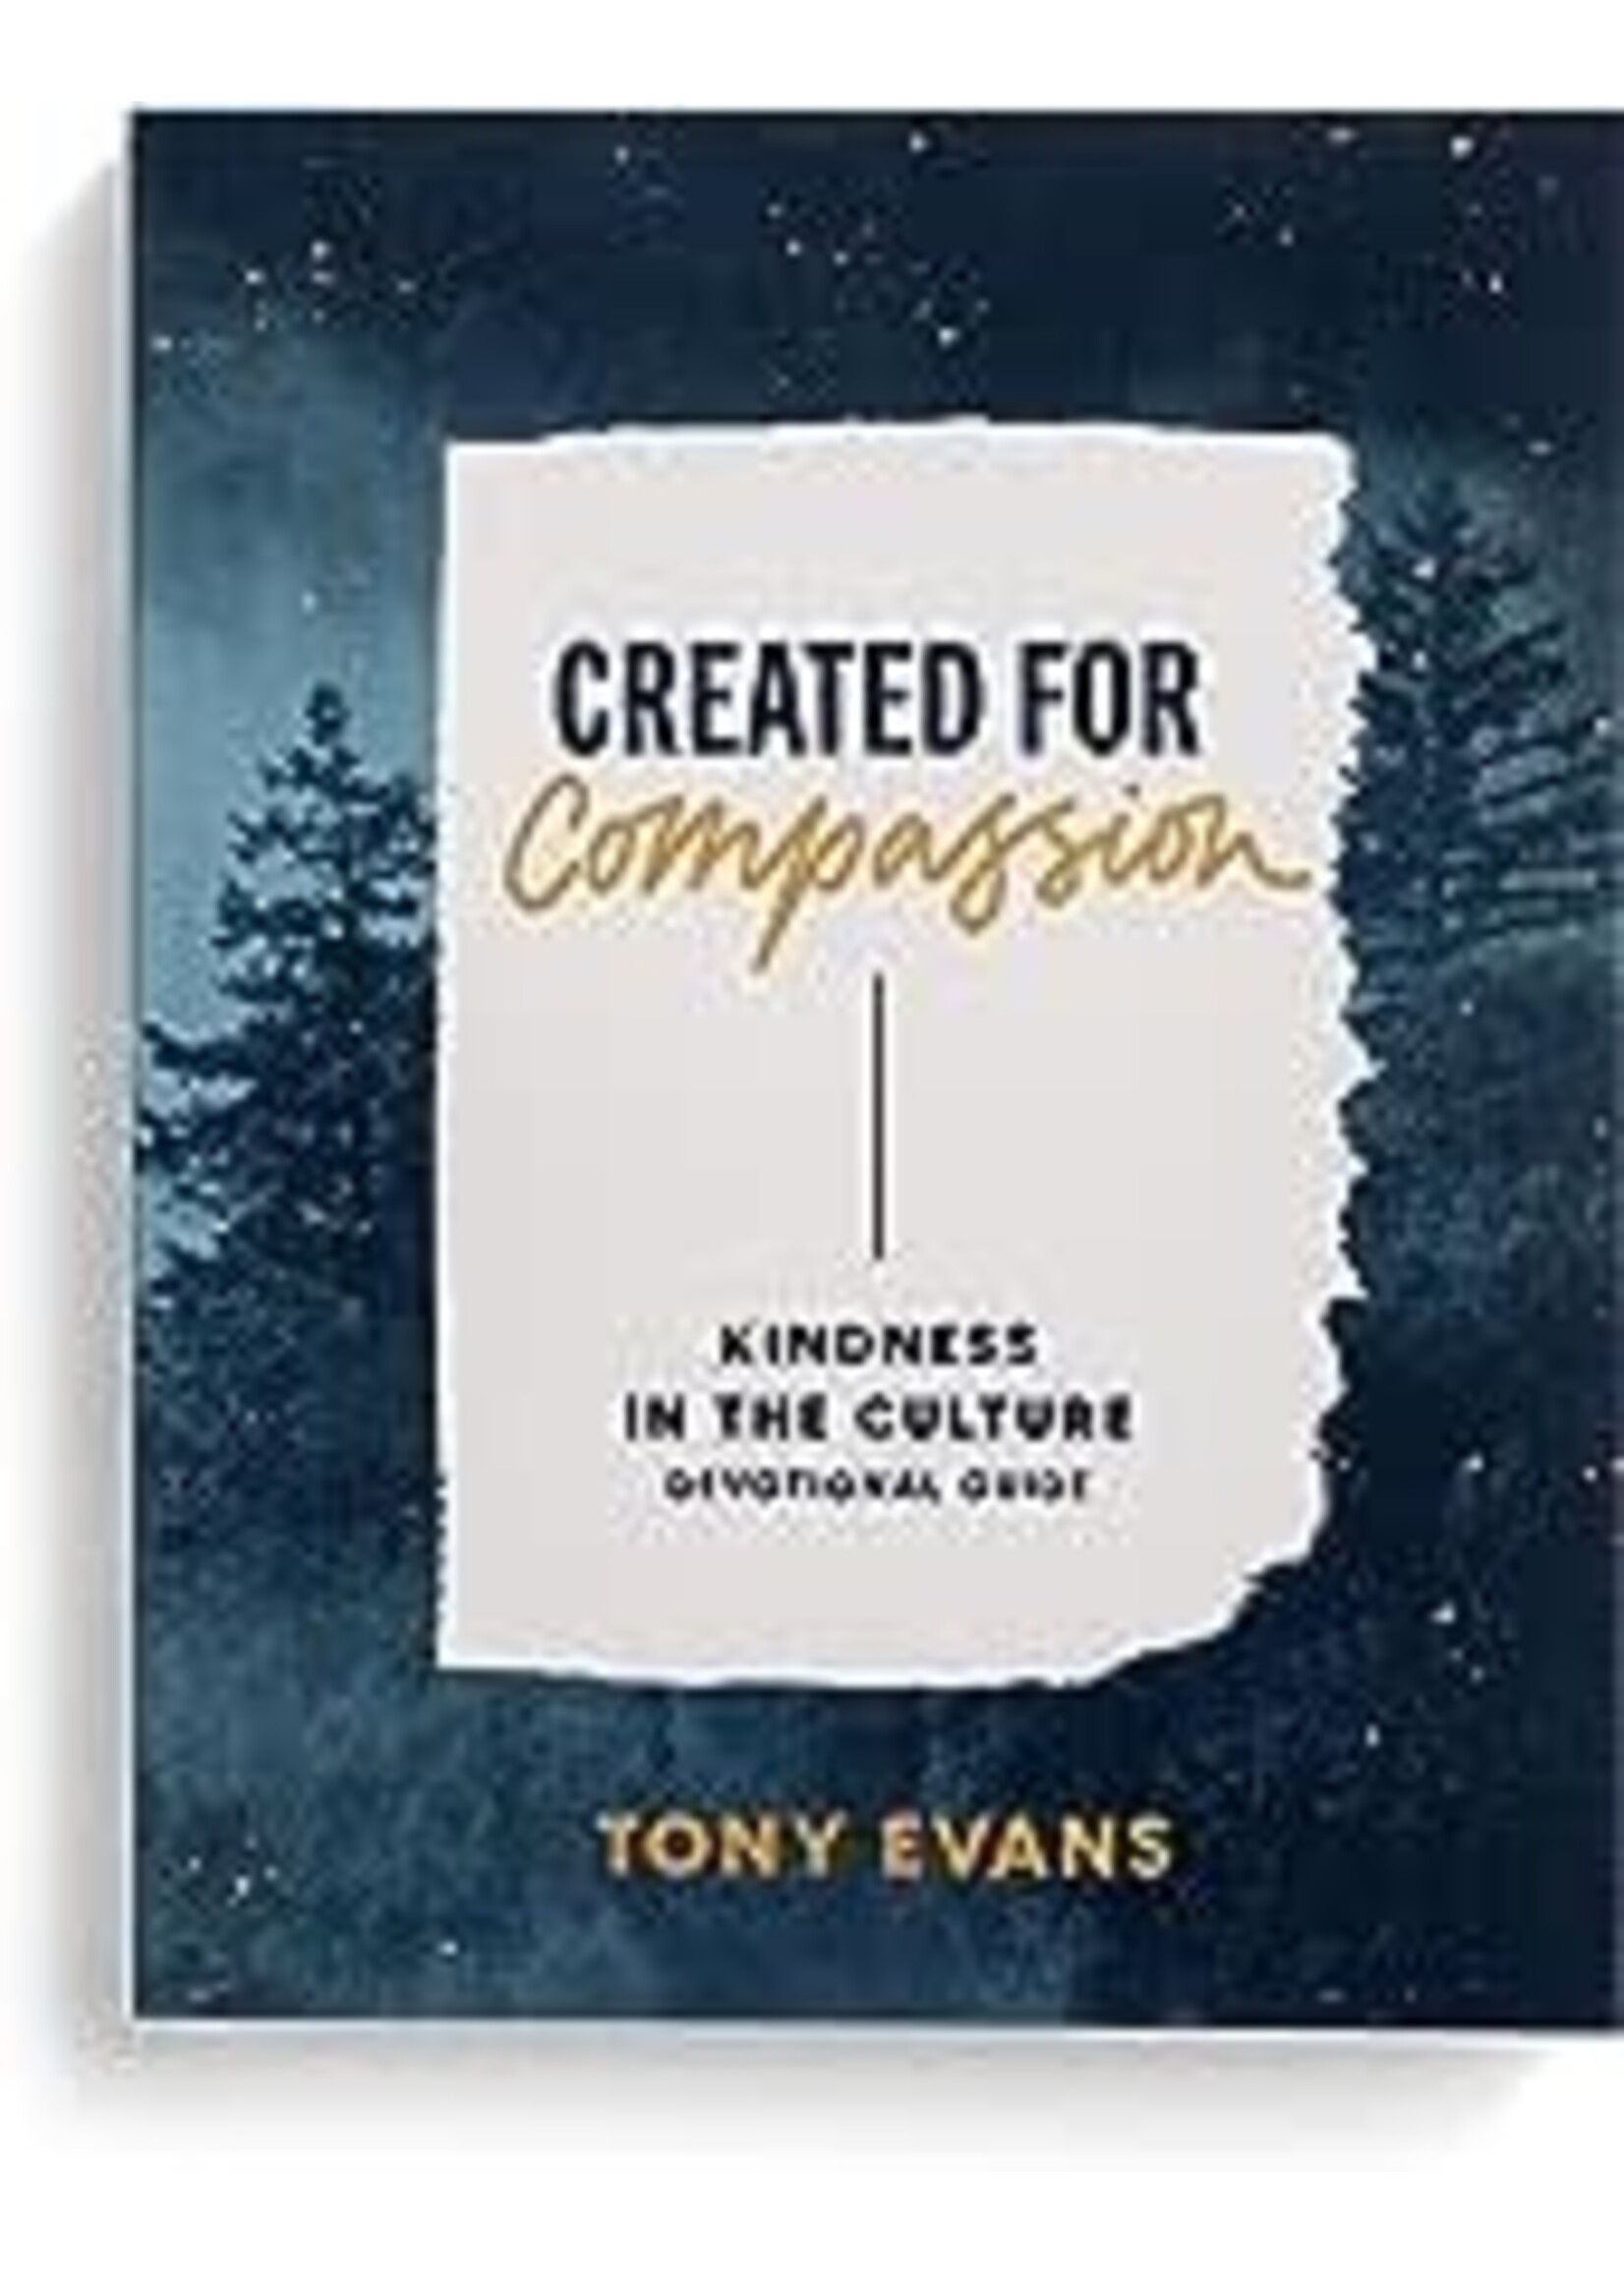 Created for Compassion